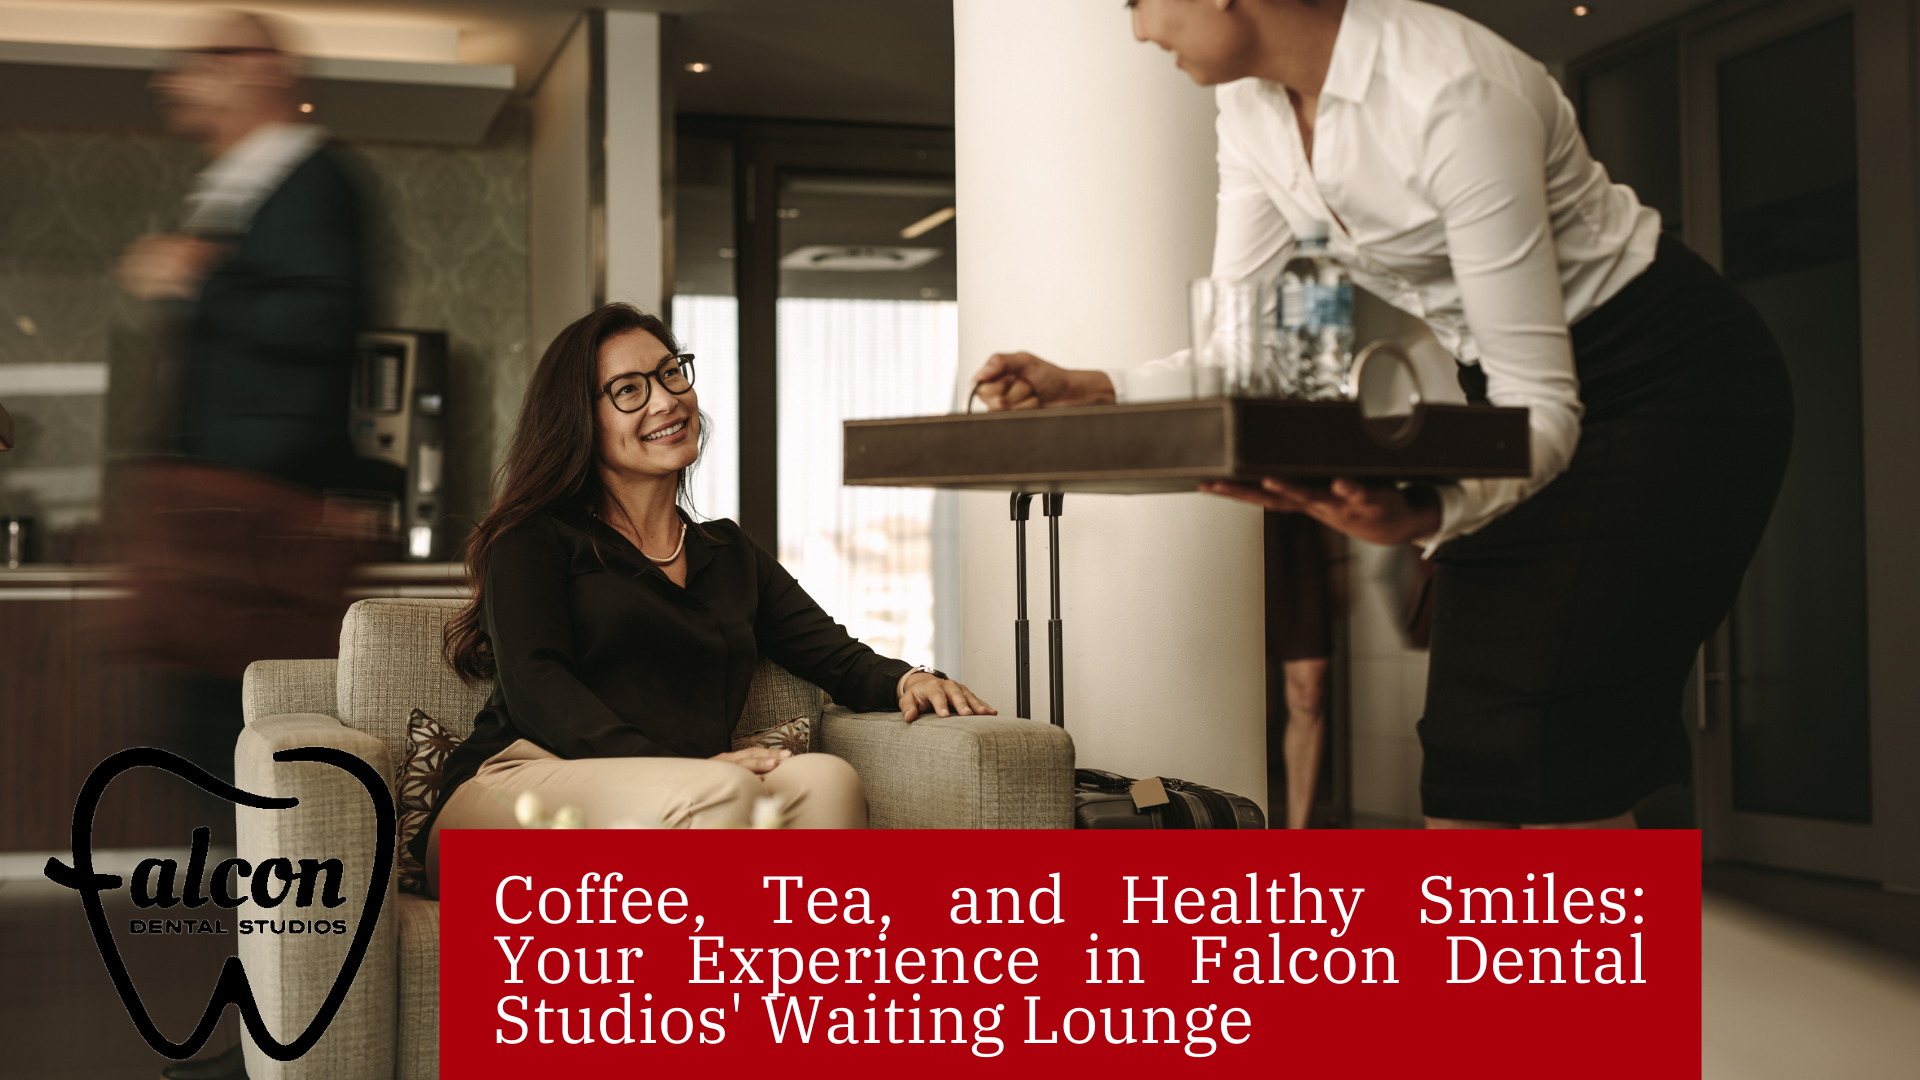 Coffee, Tea, and Healthy Smiles Your Experience in Falcon Dental Studios' Waiting Lounge